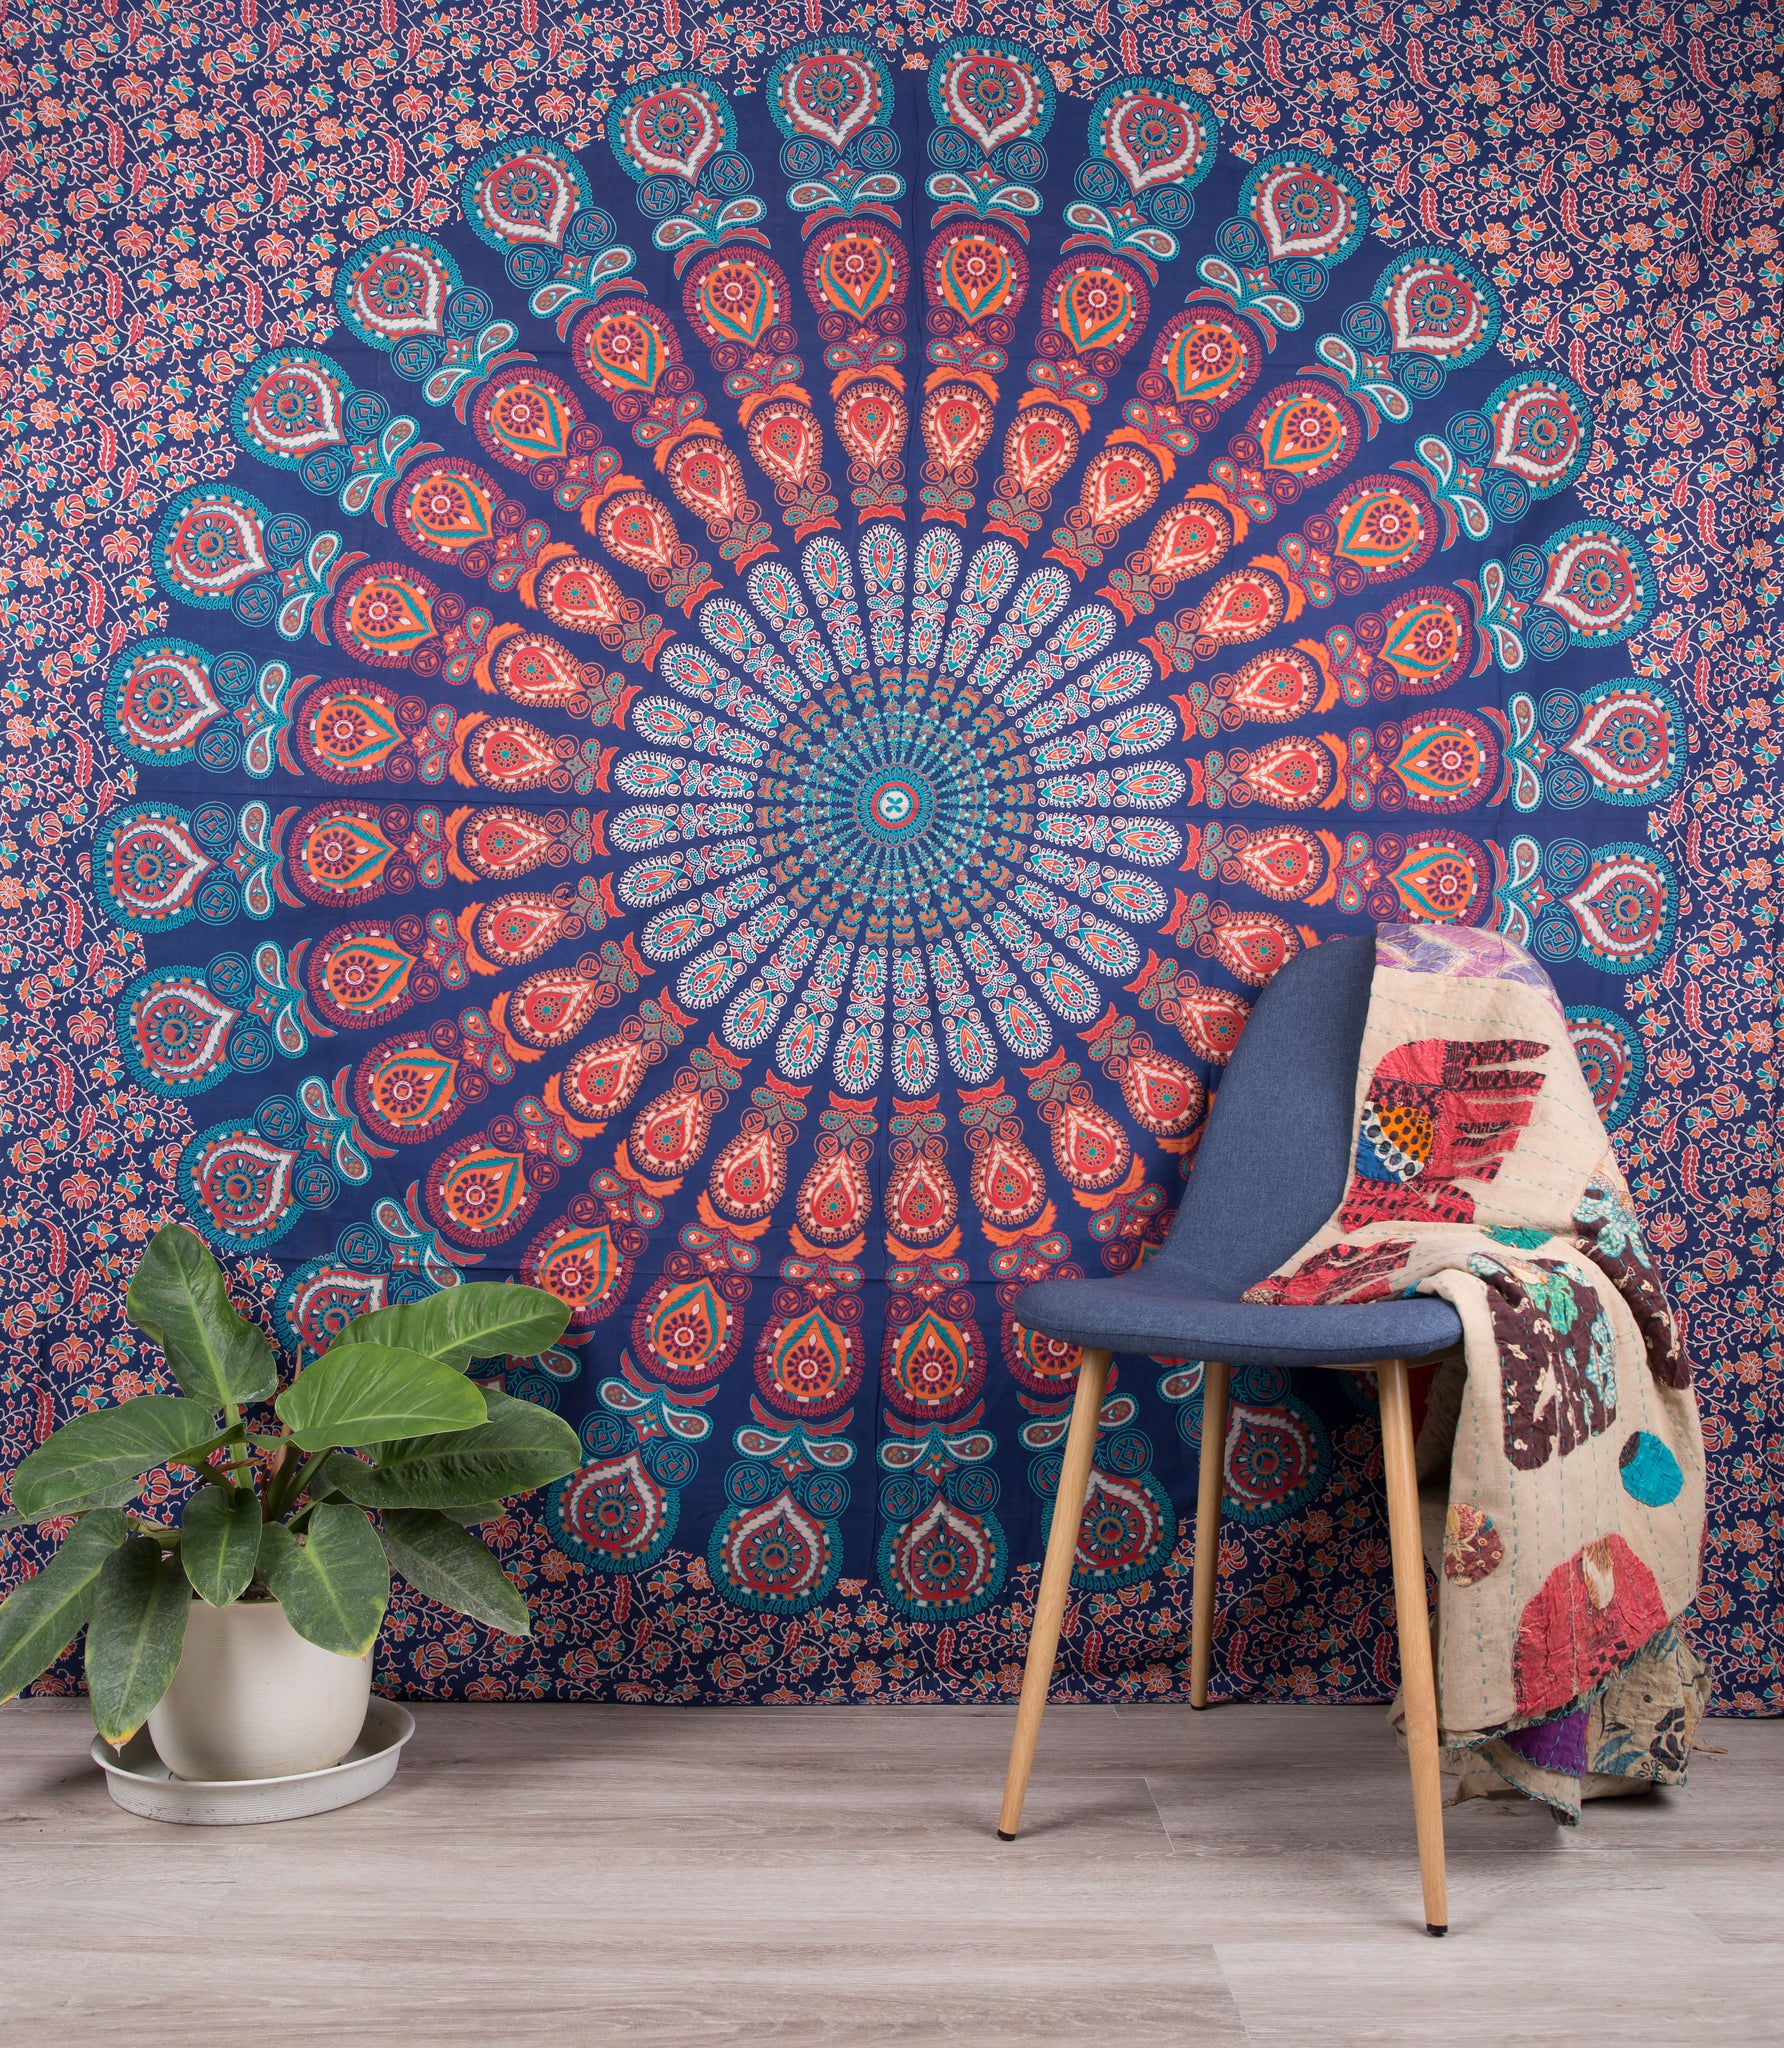 Shop blue mandala tapestry, boho tapestries, wall hanging tapestries for bedroom, rustic tapestries, bohemian style tapestries